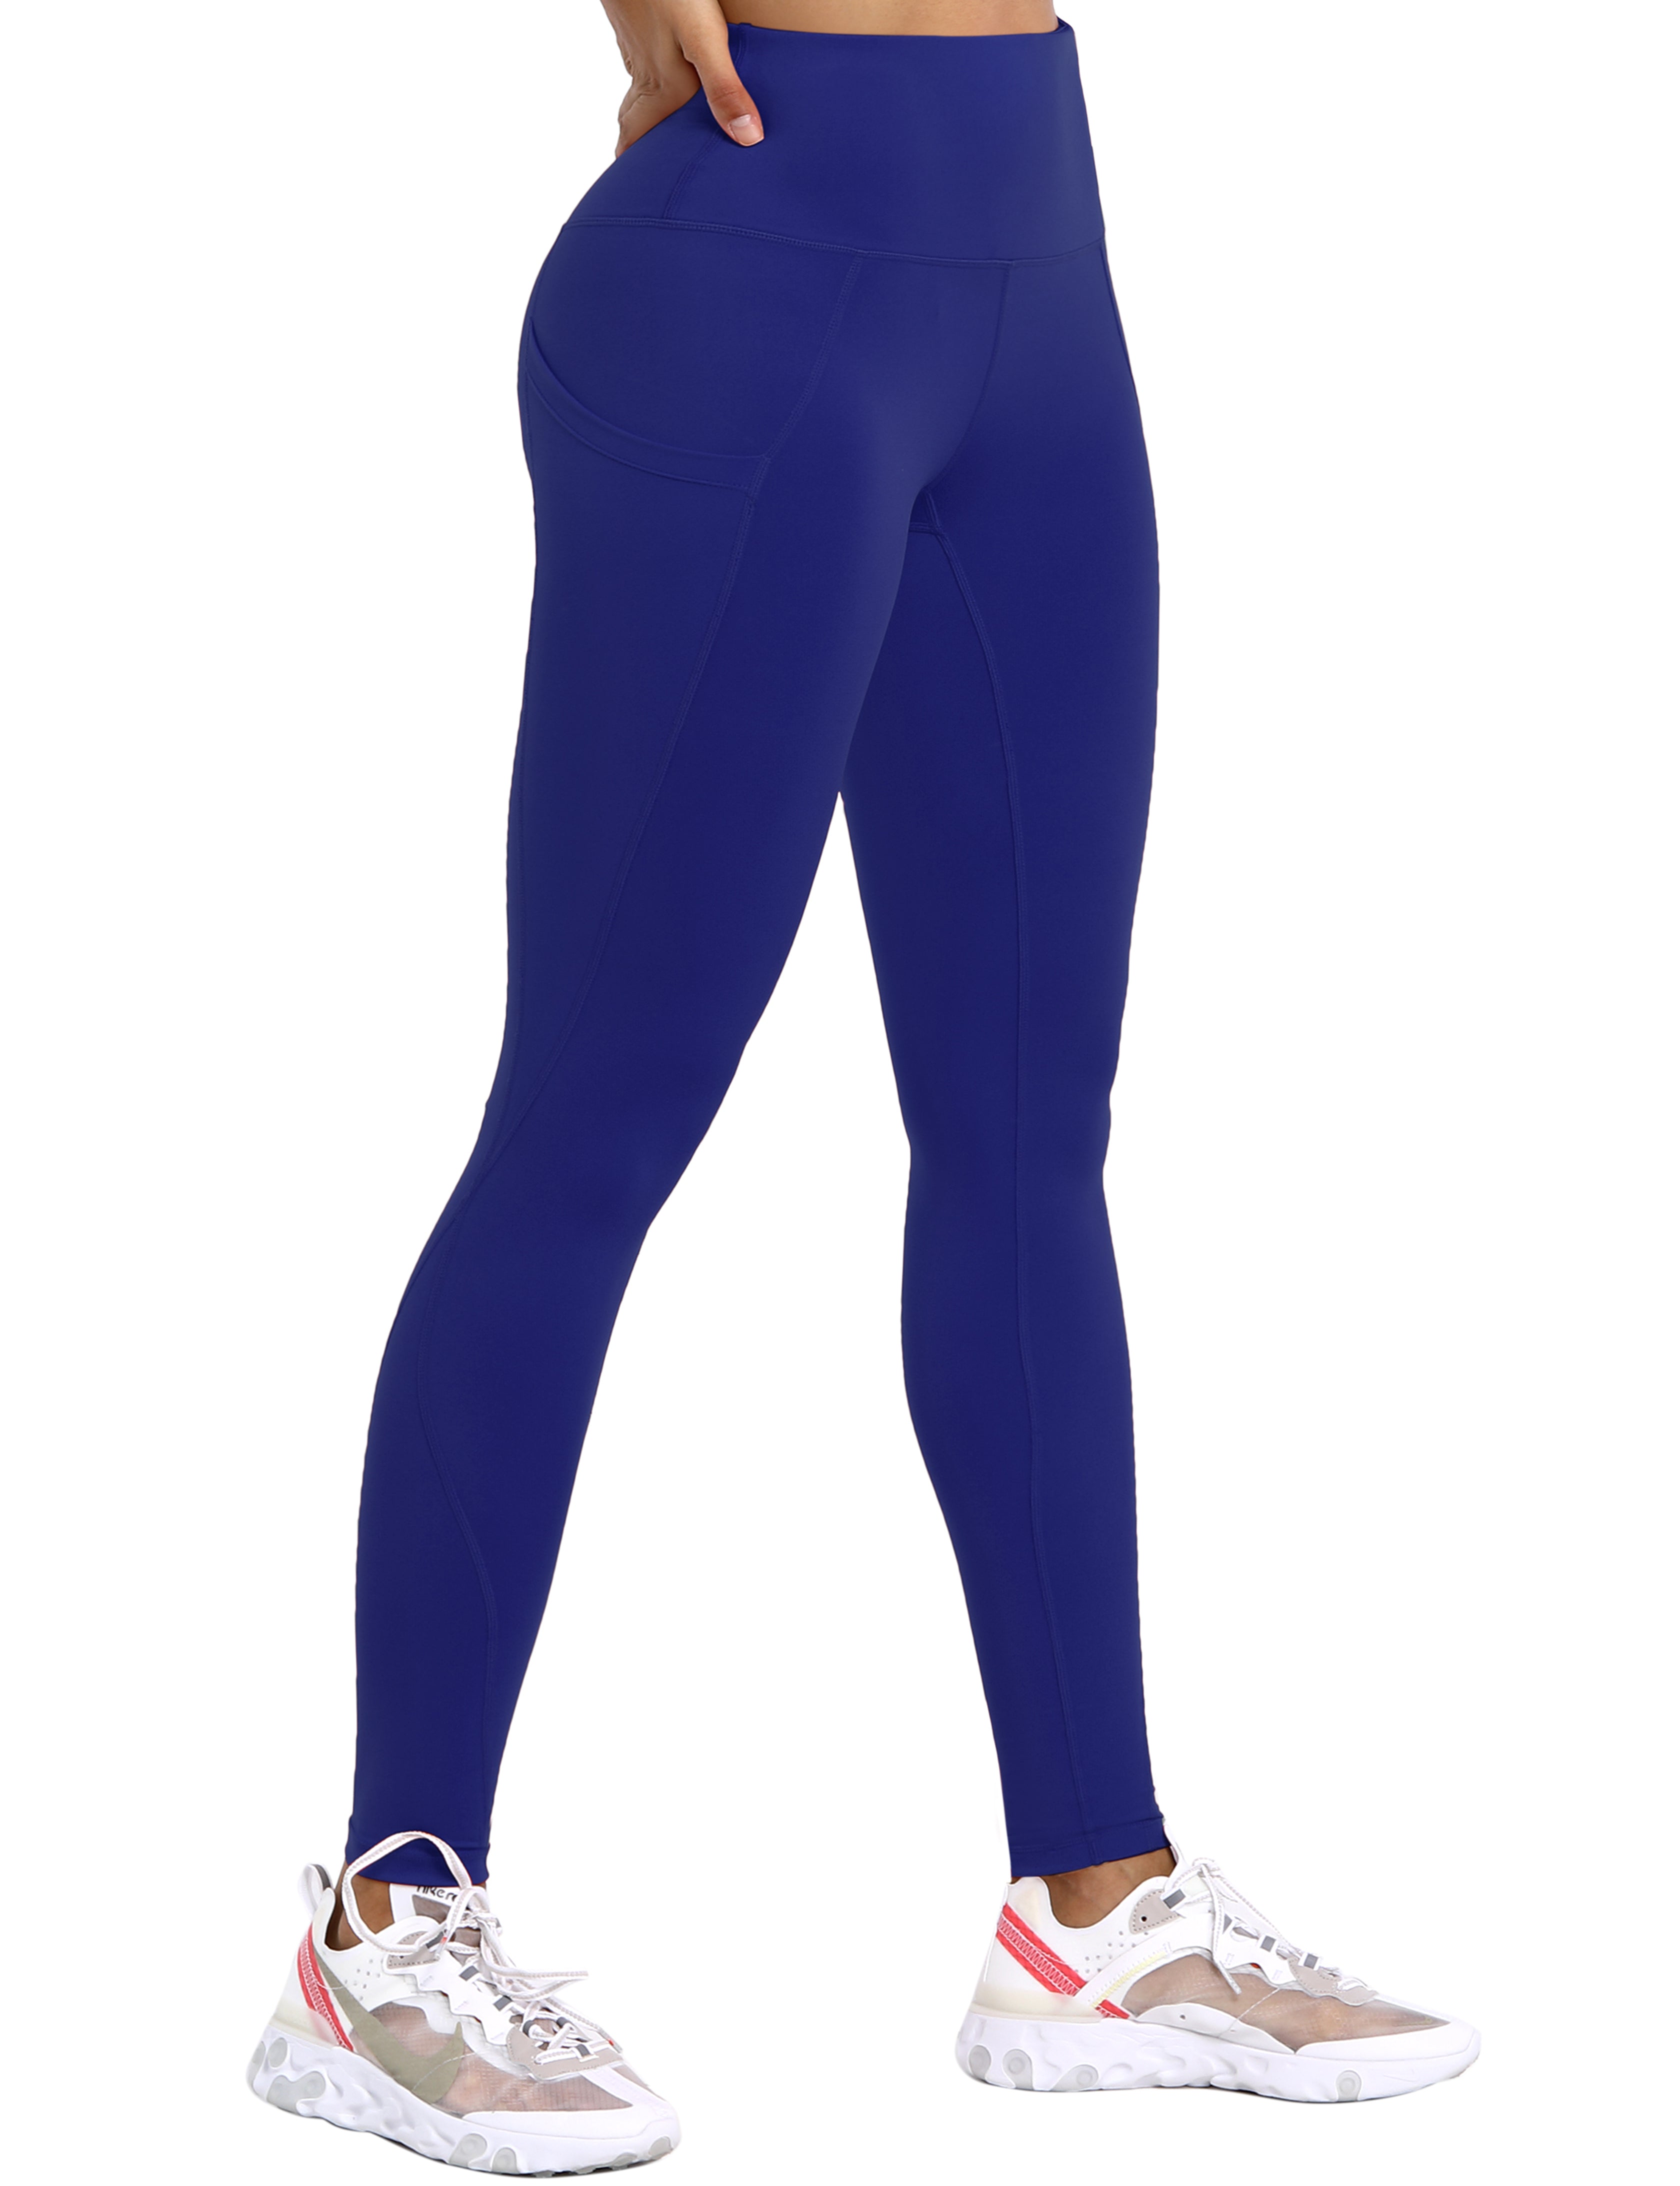 High Waist Side Pockets Golf Pants navy 75% Nylon, 25% Spandex Fabric doesn't attract lint easily 4-way stretch No see-through Moisture-wicking Tummy control Inner pocket